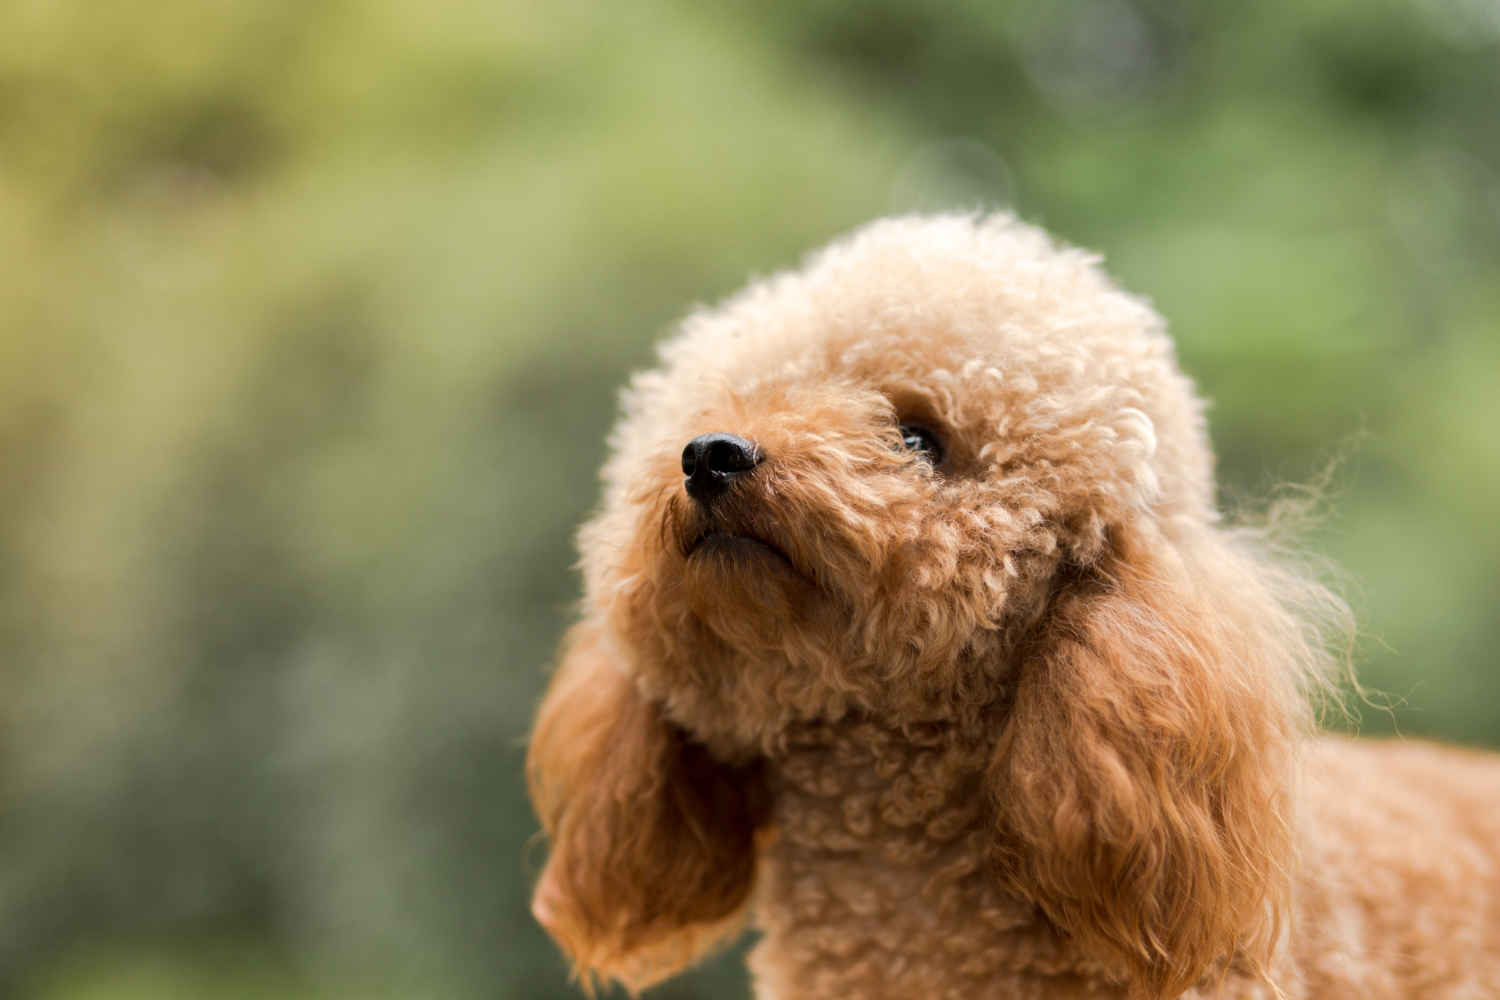 What are the best methods for crate training a Poodle puppy?